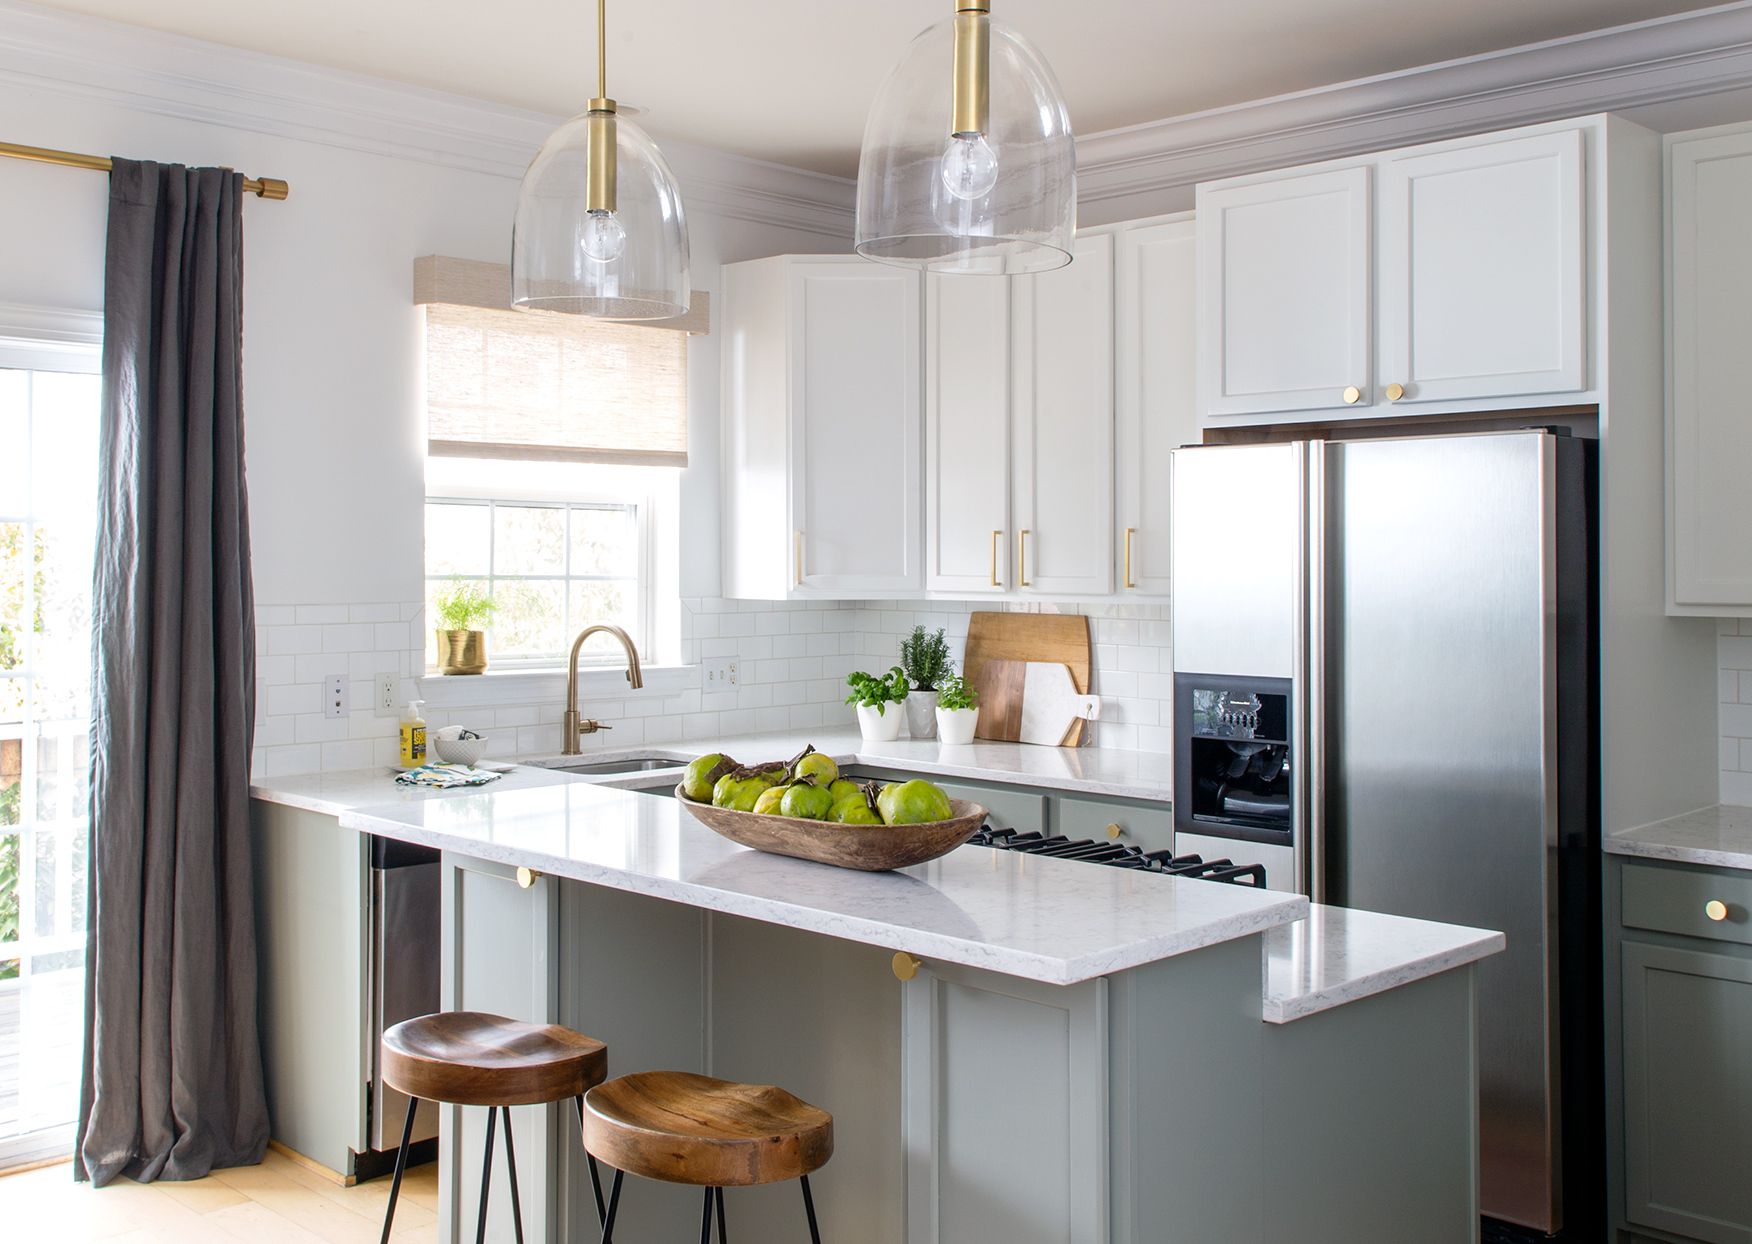 How To Remodel Kitchen Countertops